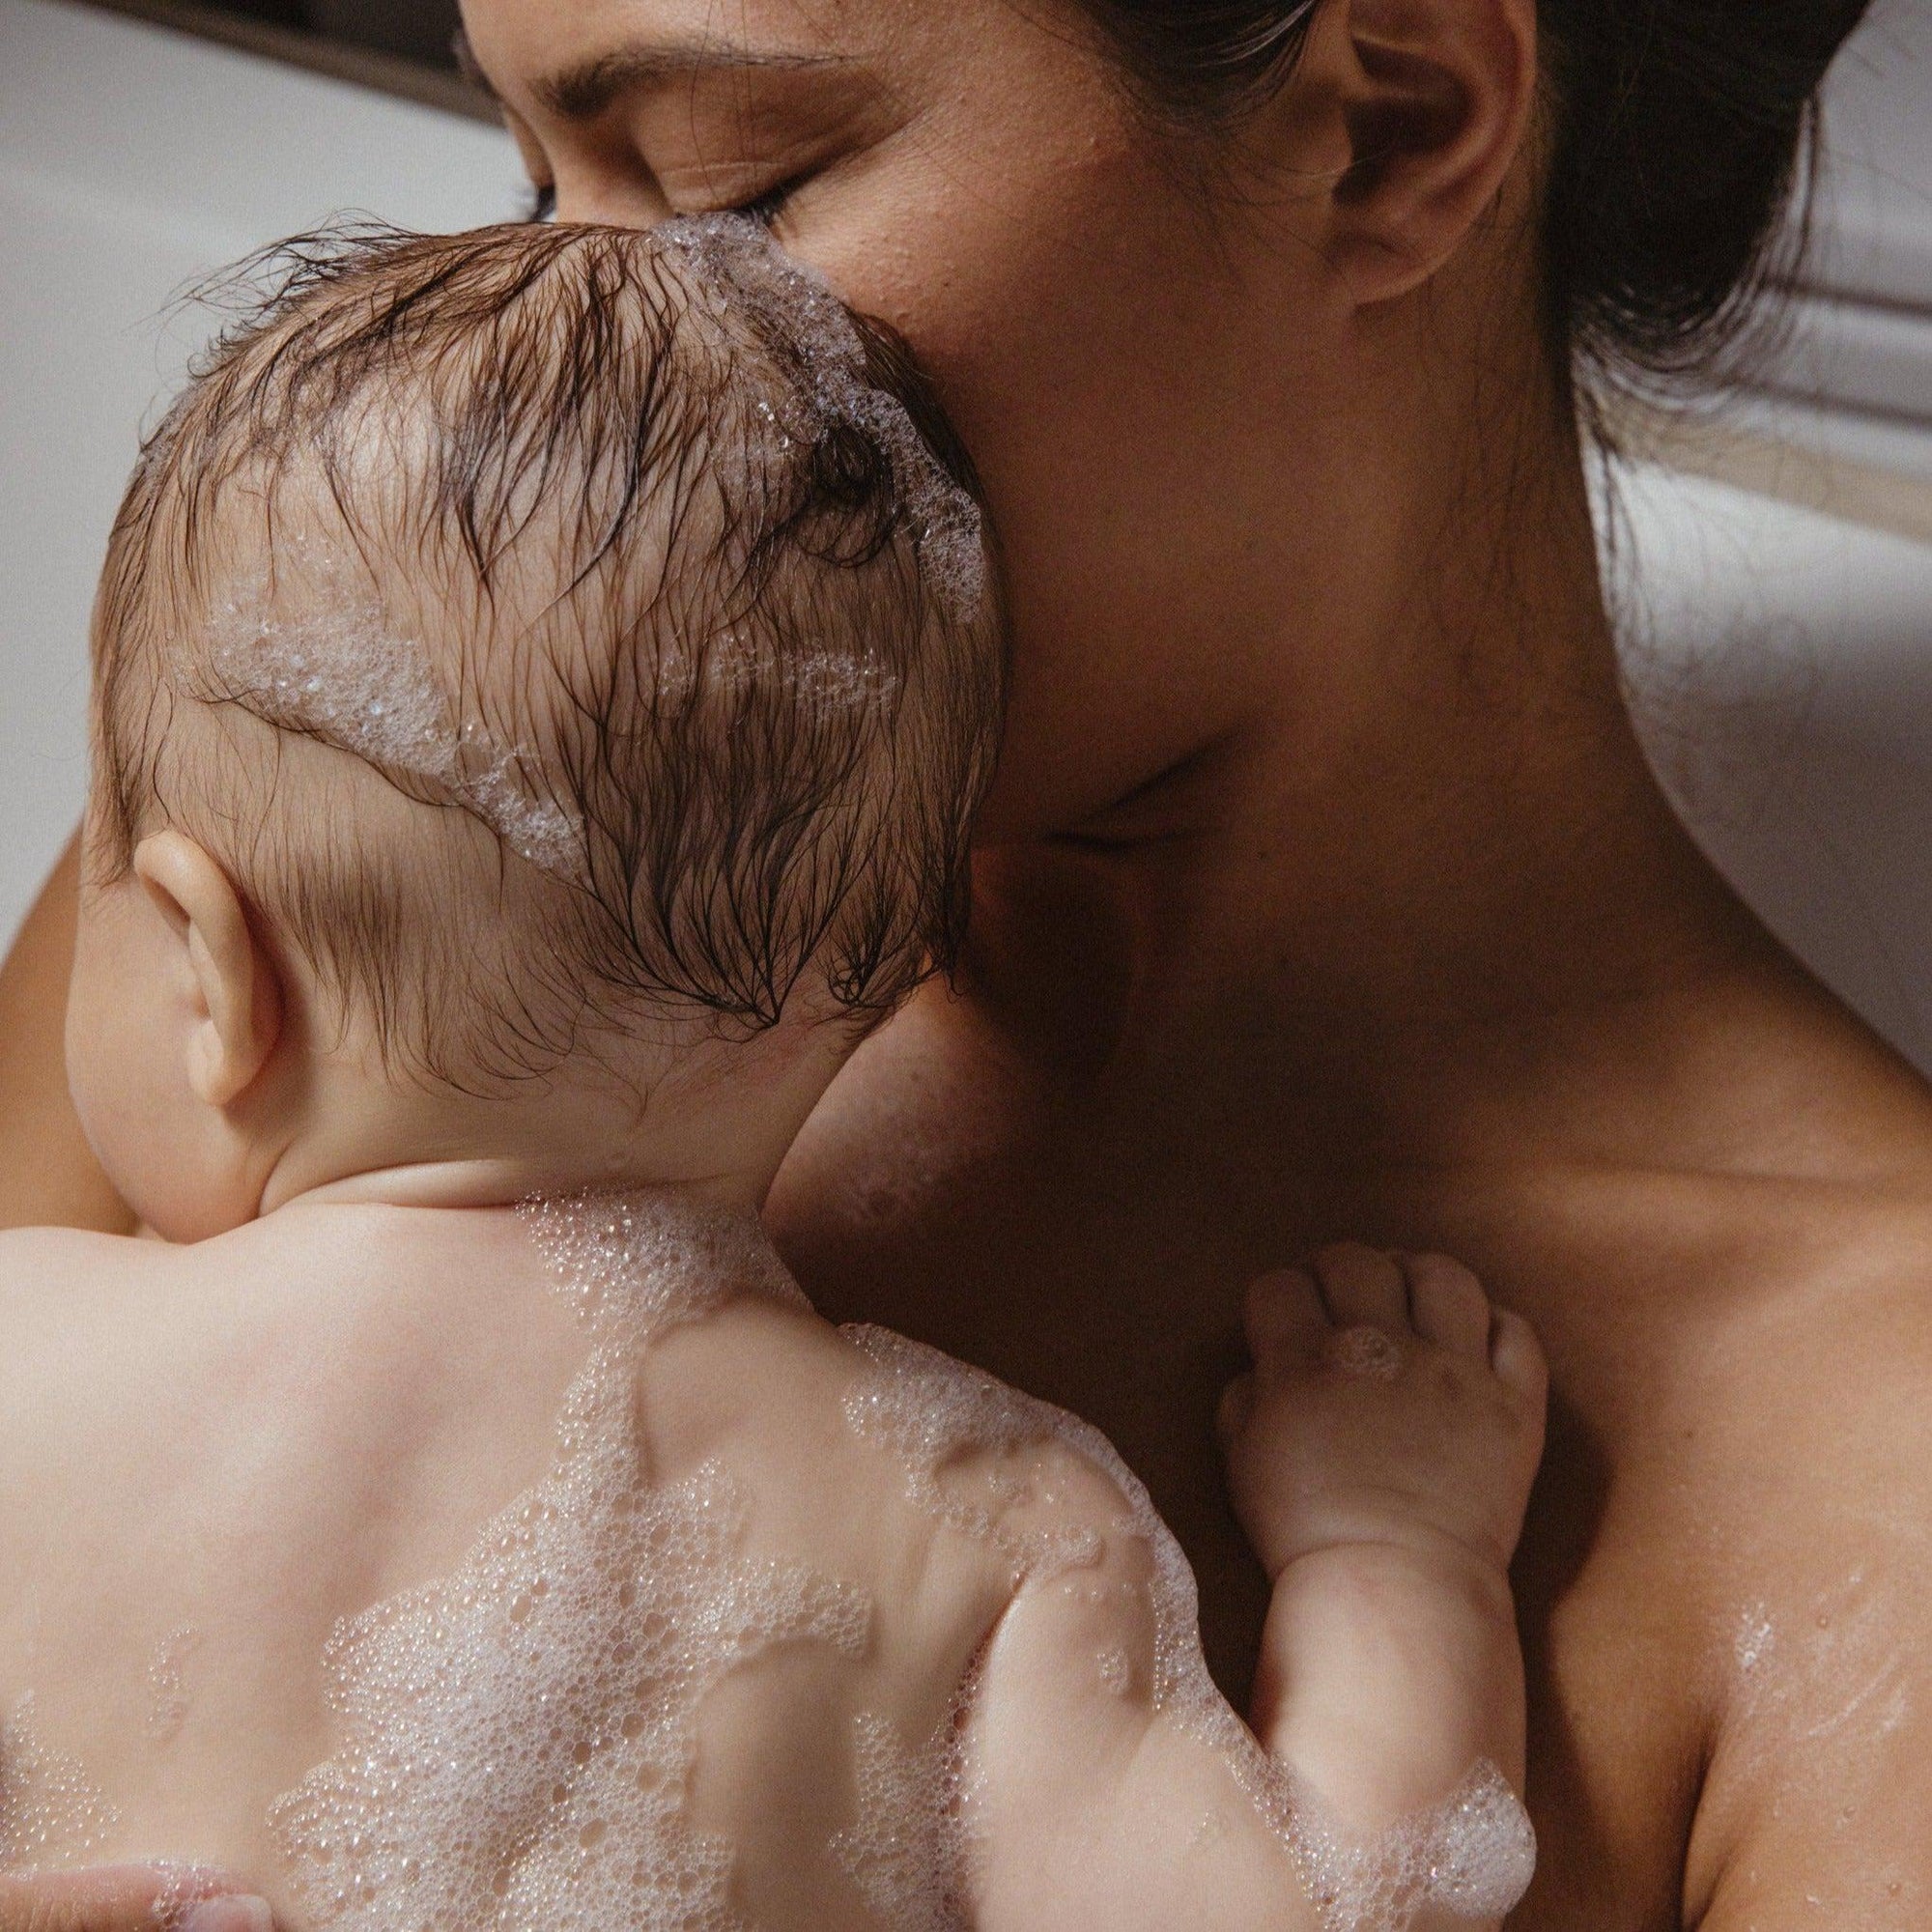 A woman is holding a baby in a bath tub filled with Wiley Body organic aloe vera-infused Hand & Body Wash.